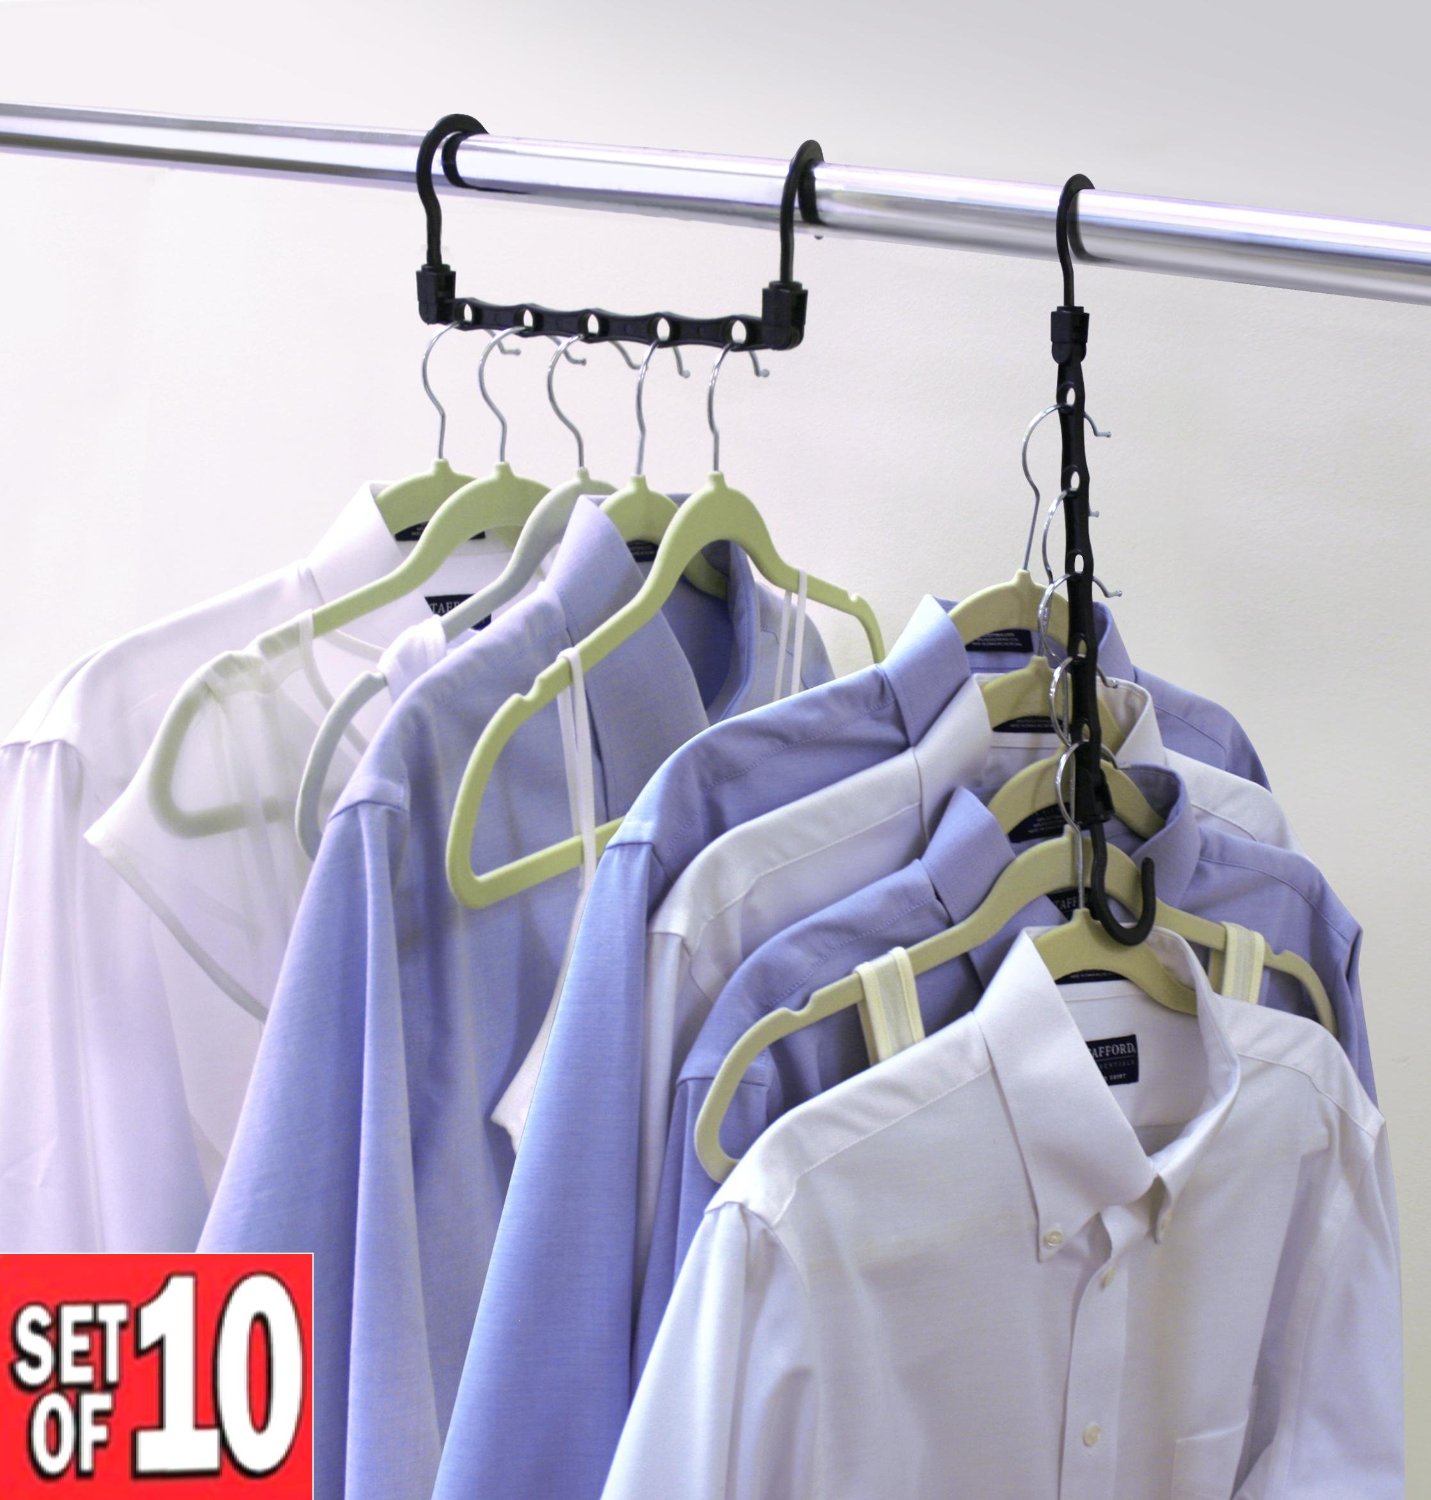 Set of 10 Cascading Hangers—$7.59 + FREE Shipping!